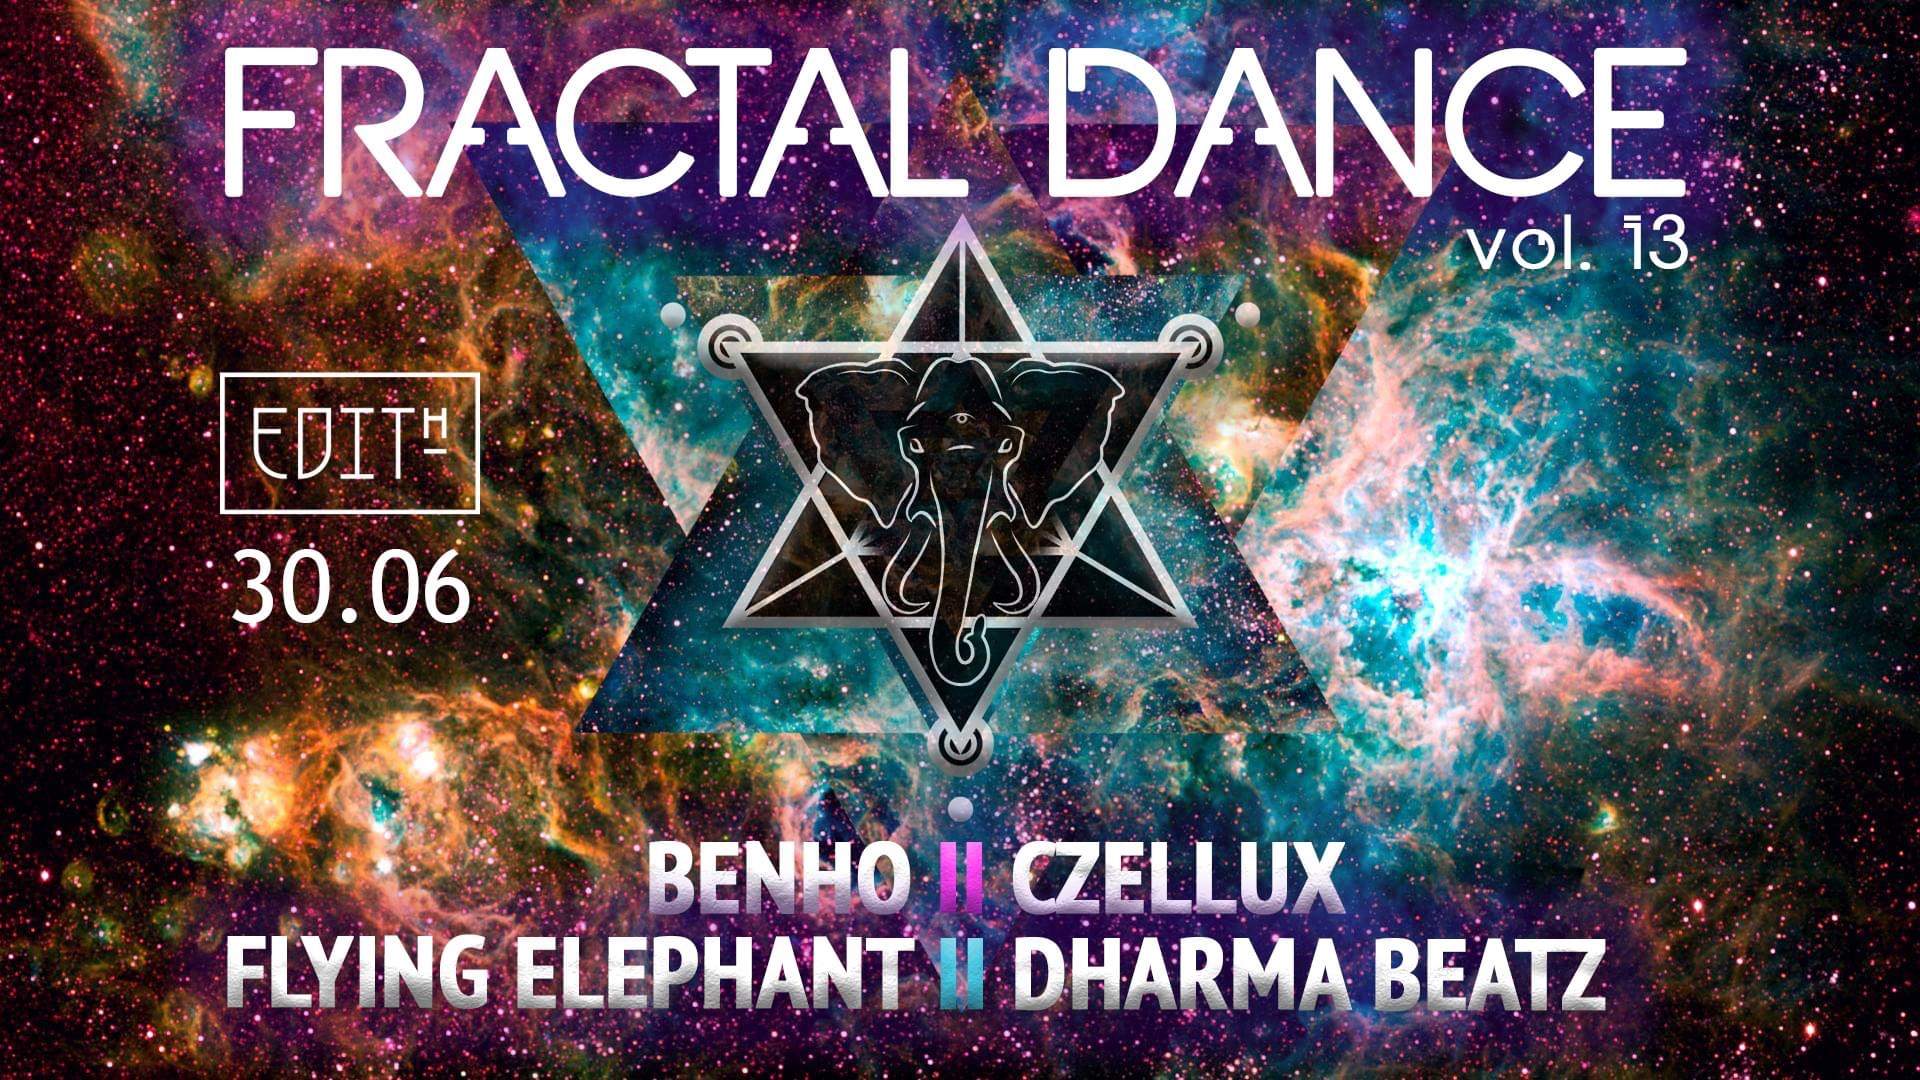 Chily Team: Fractal Dance vol 13. (goa trance special) at Edith, Budapest